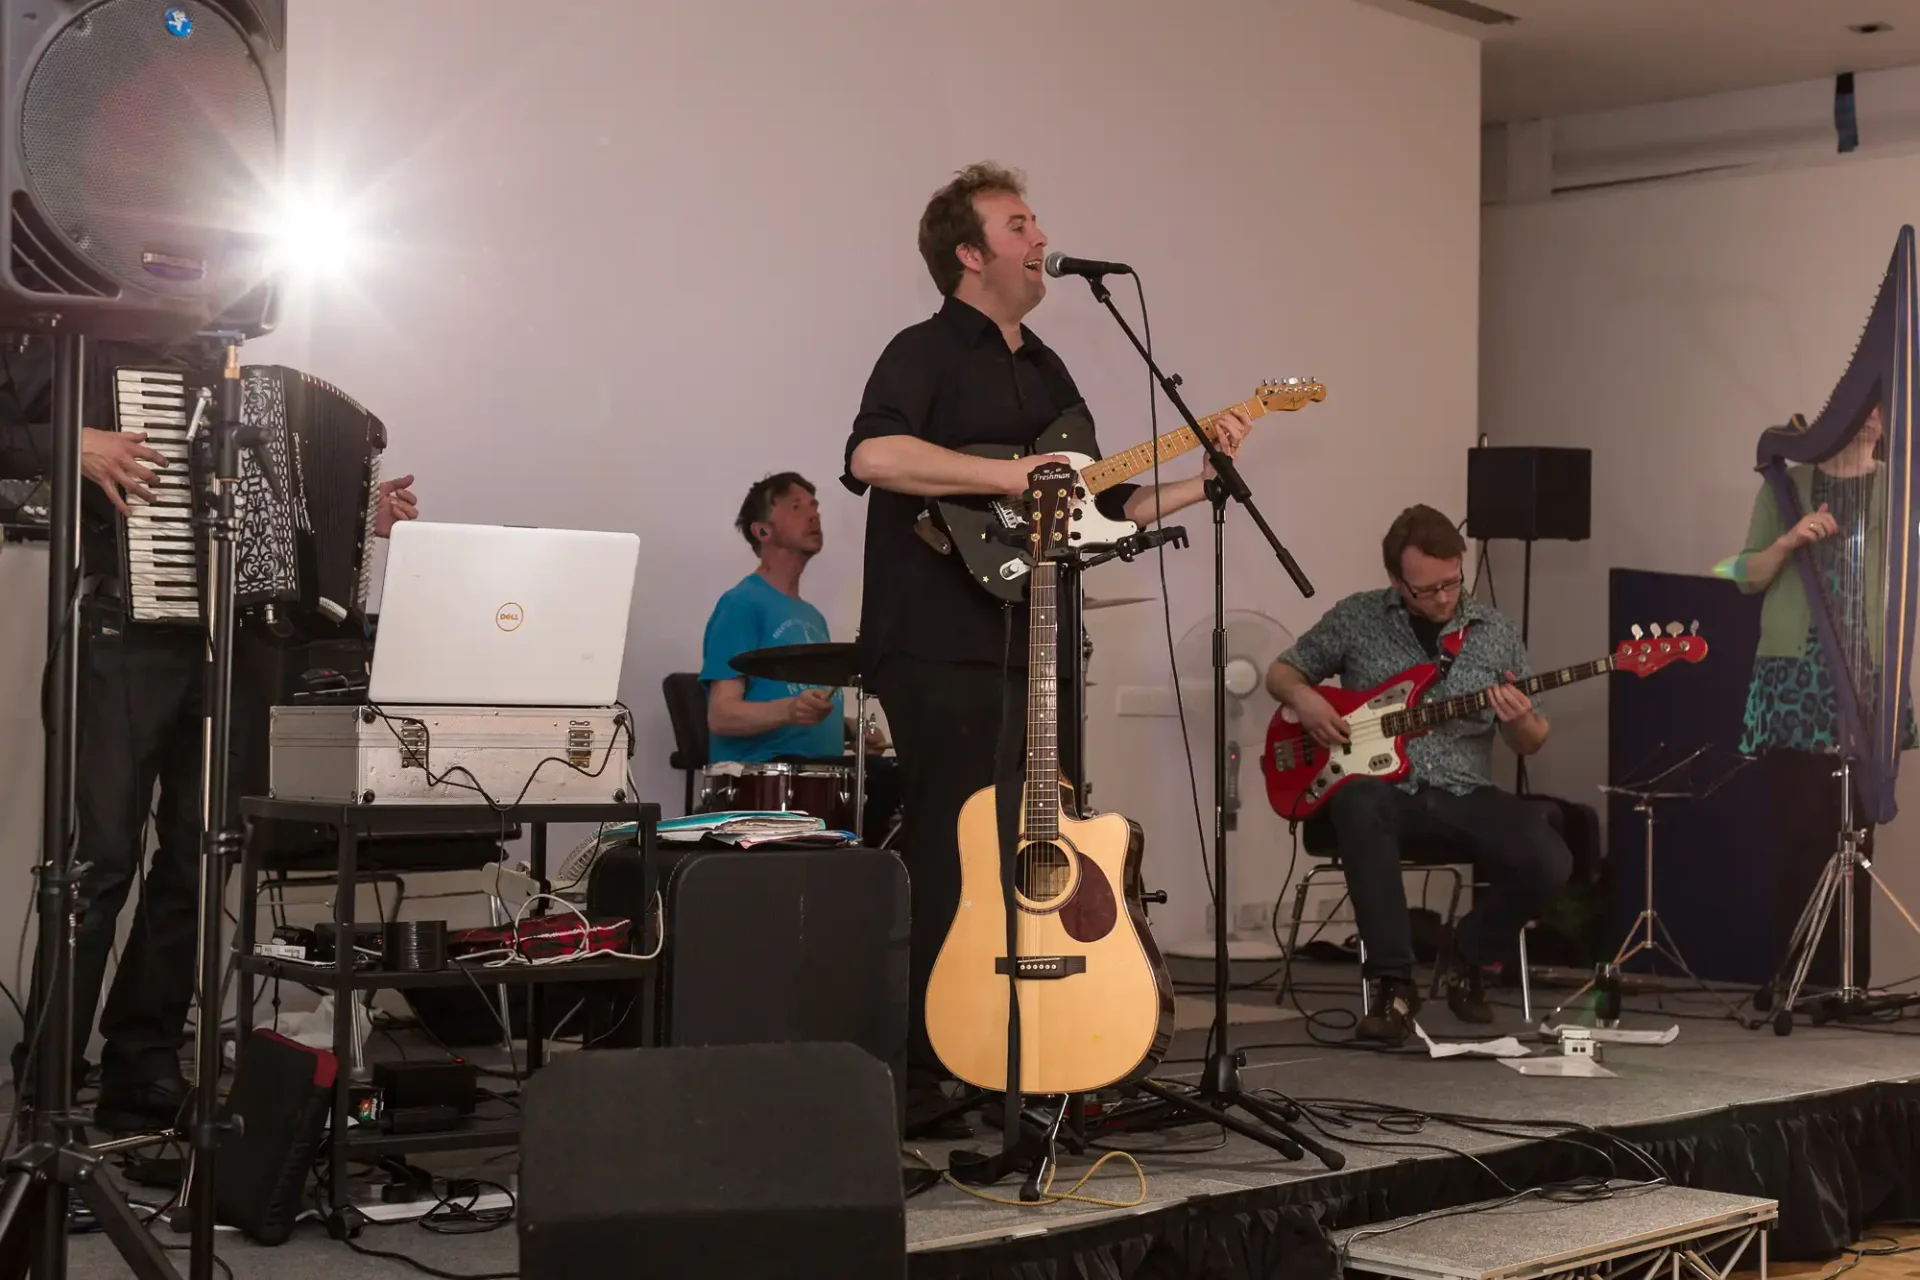 A band performs at an indoor event, featuring a vocalist, guitarist, bassist, keyboardist with a laptop, and an accordion player.